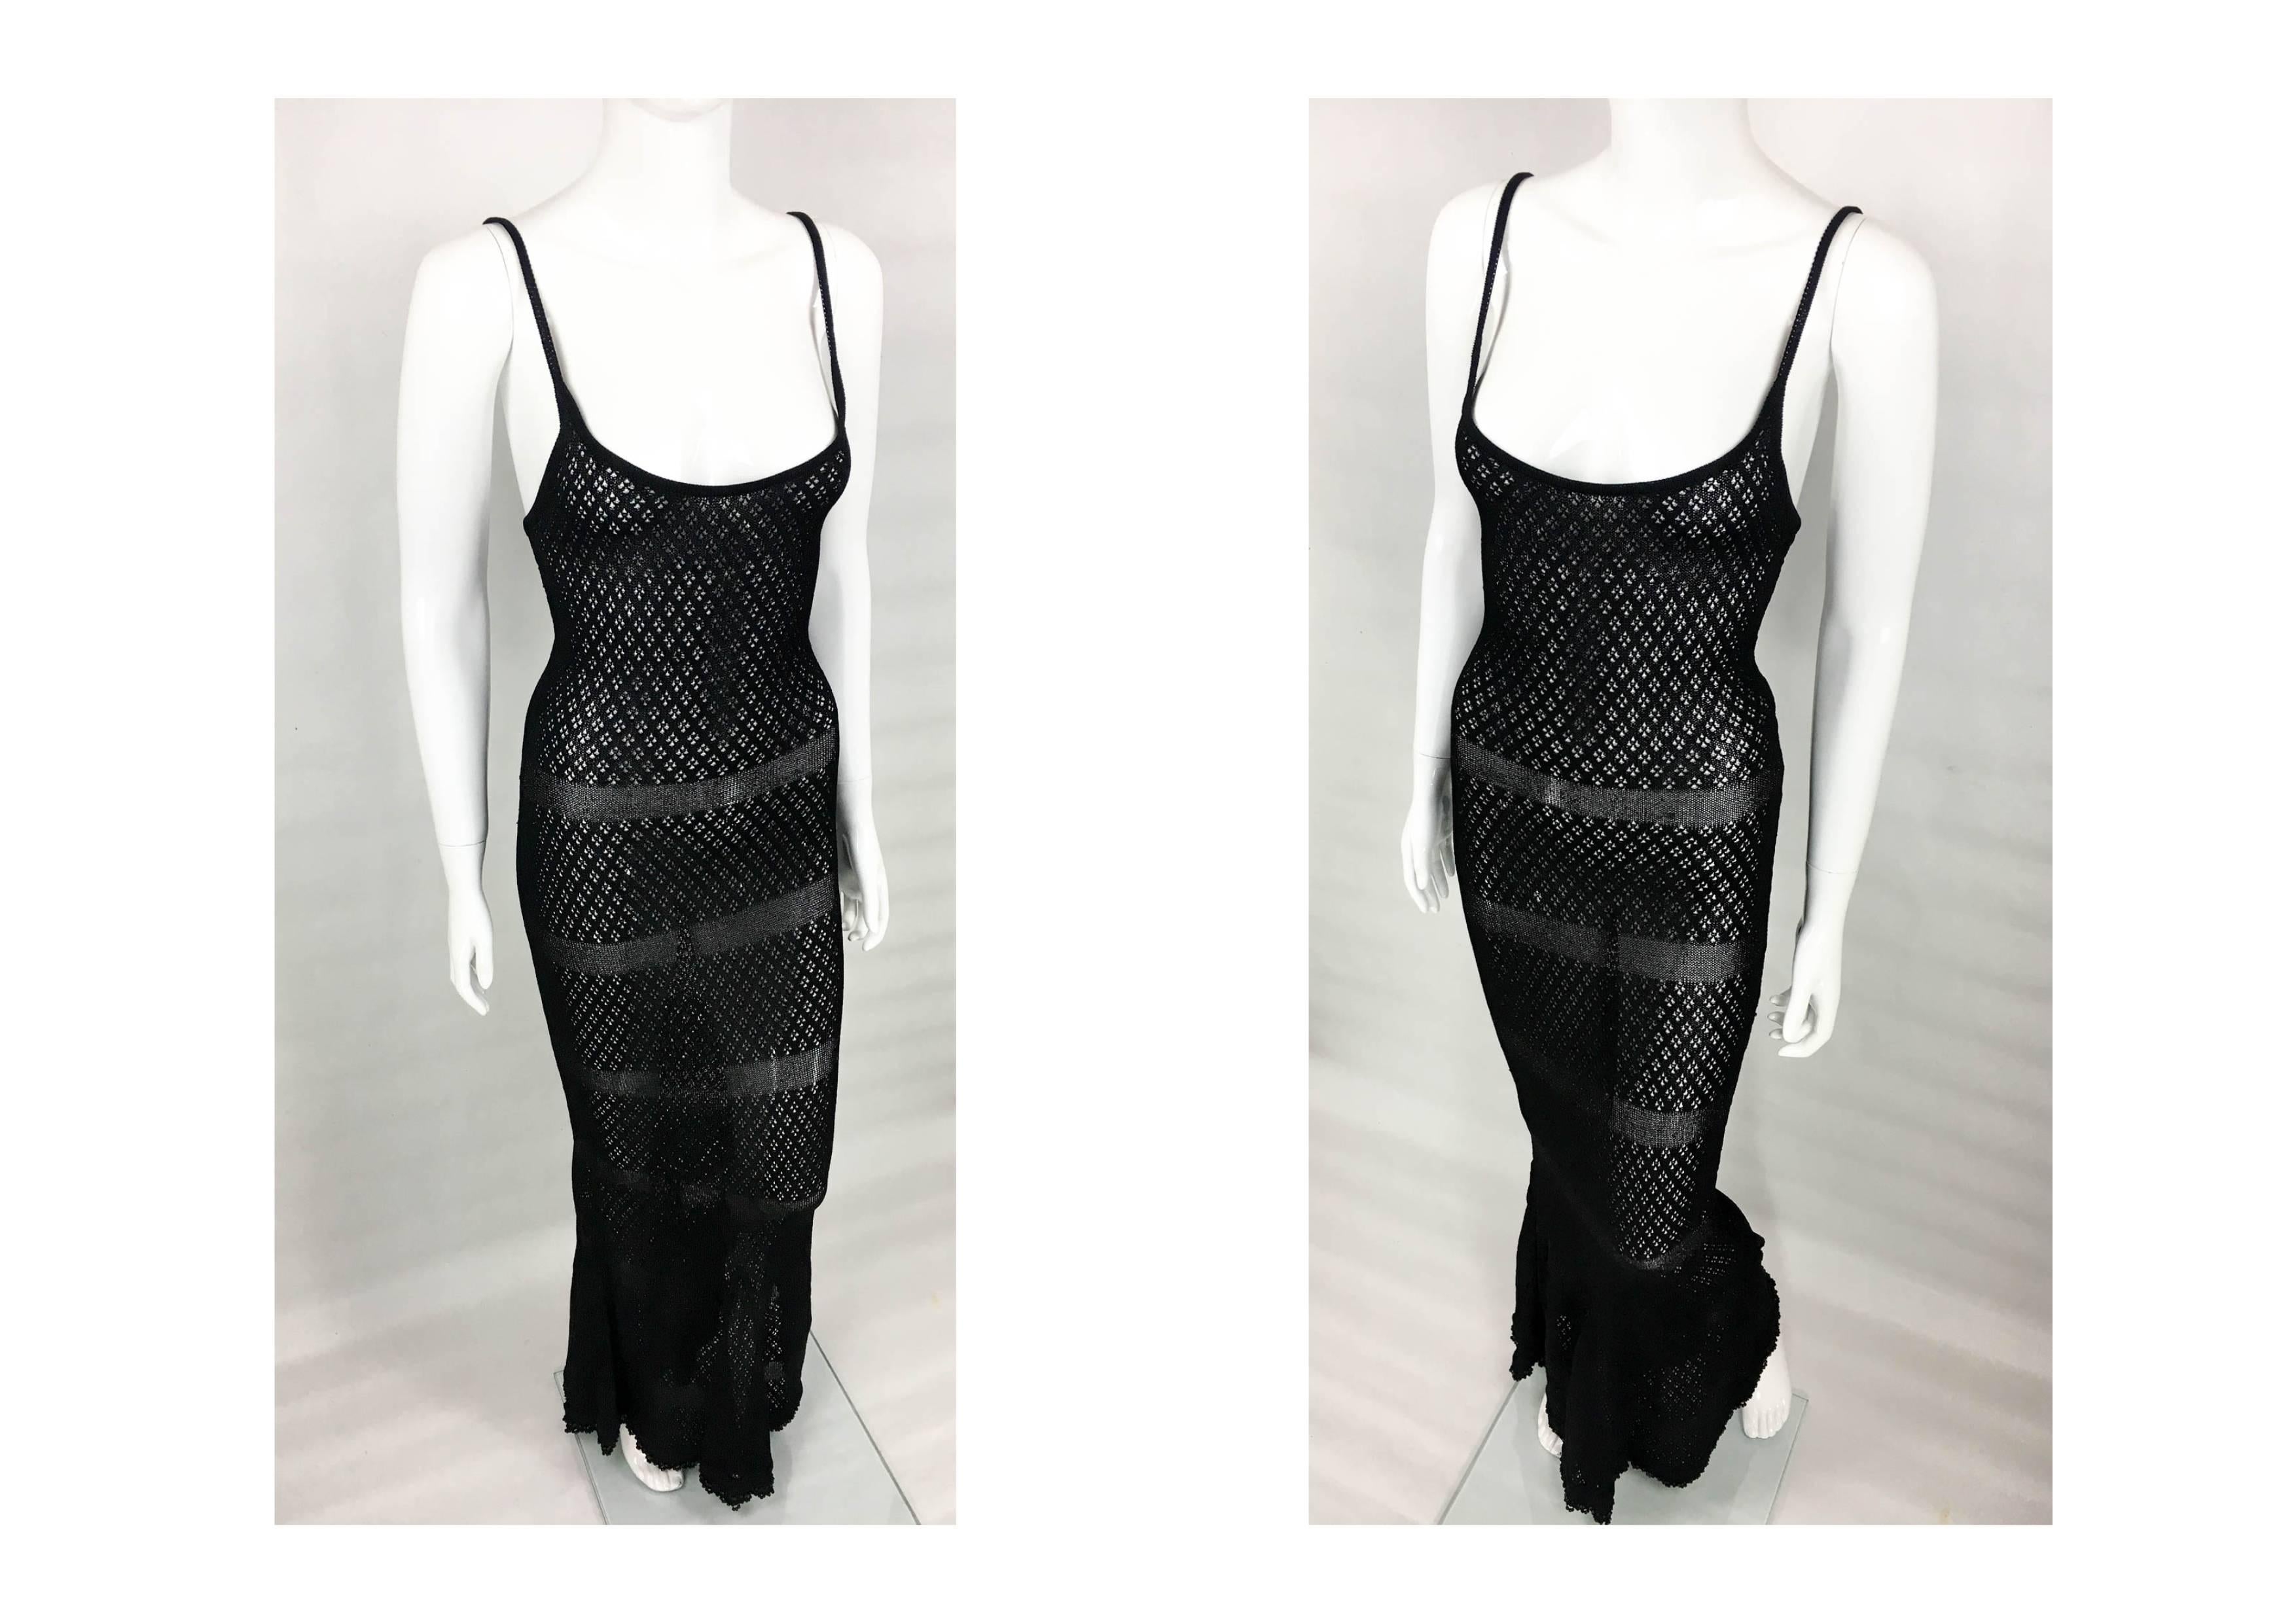 Chanel Runway and Campaign Sheer Knitted Dress With Pearl Embellishment - 1995 In Excellent Condition In London, Chelsea